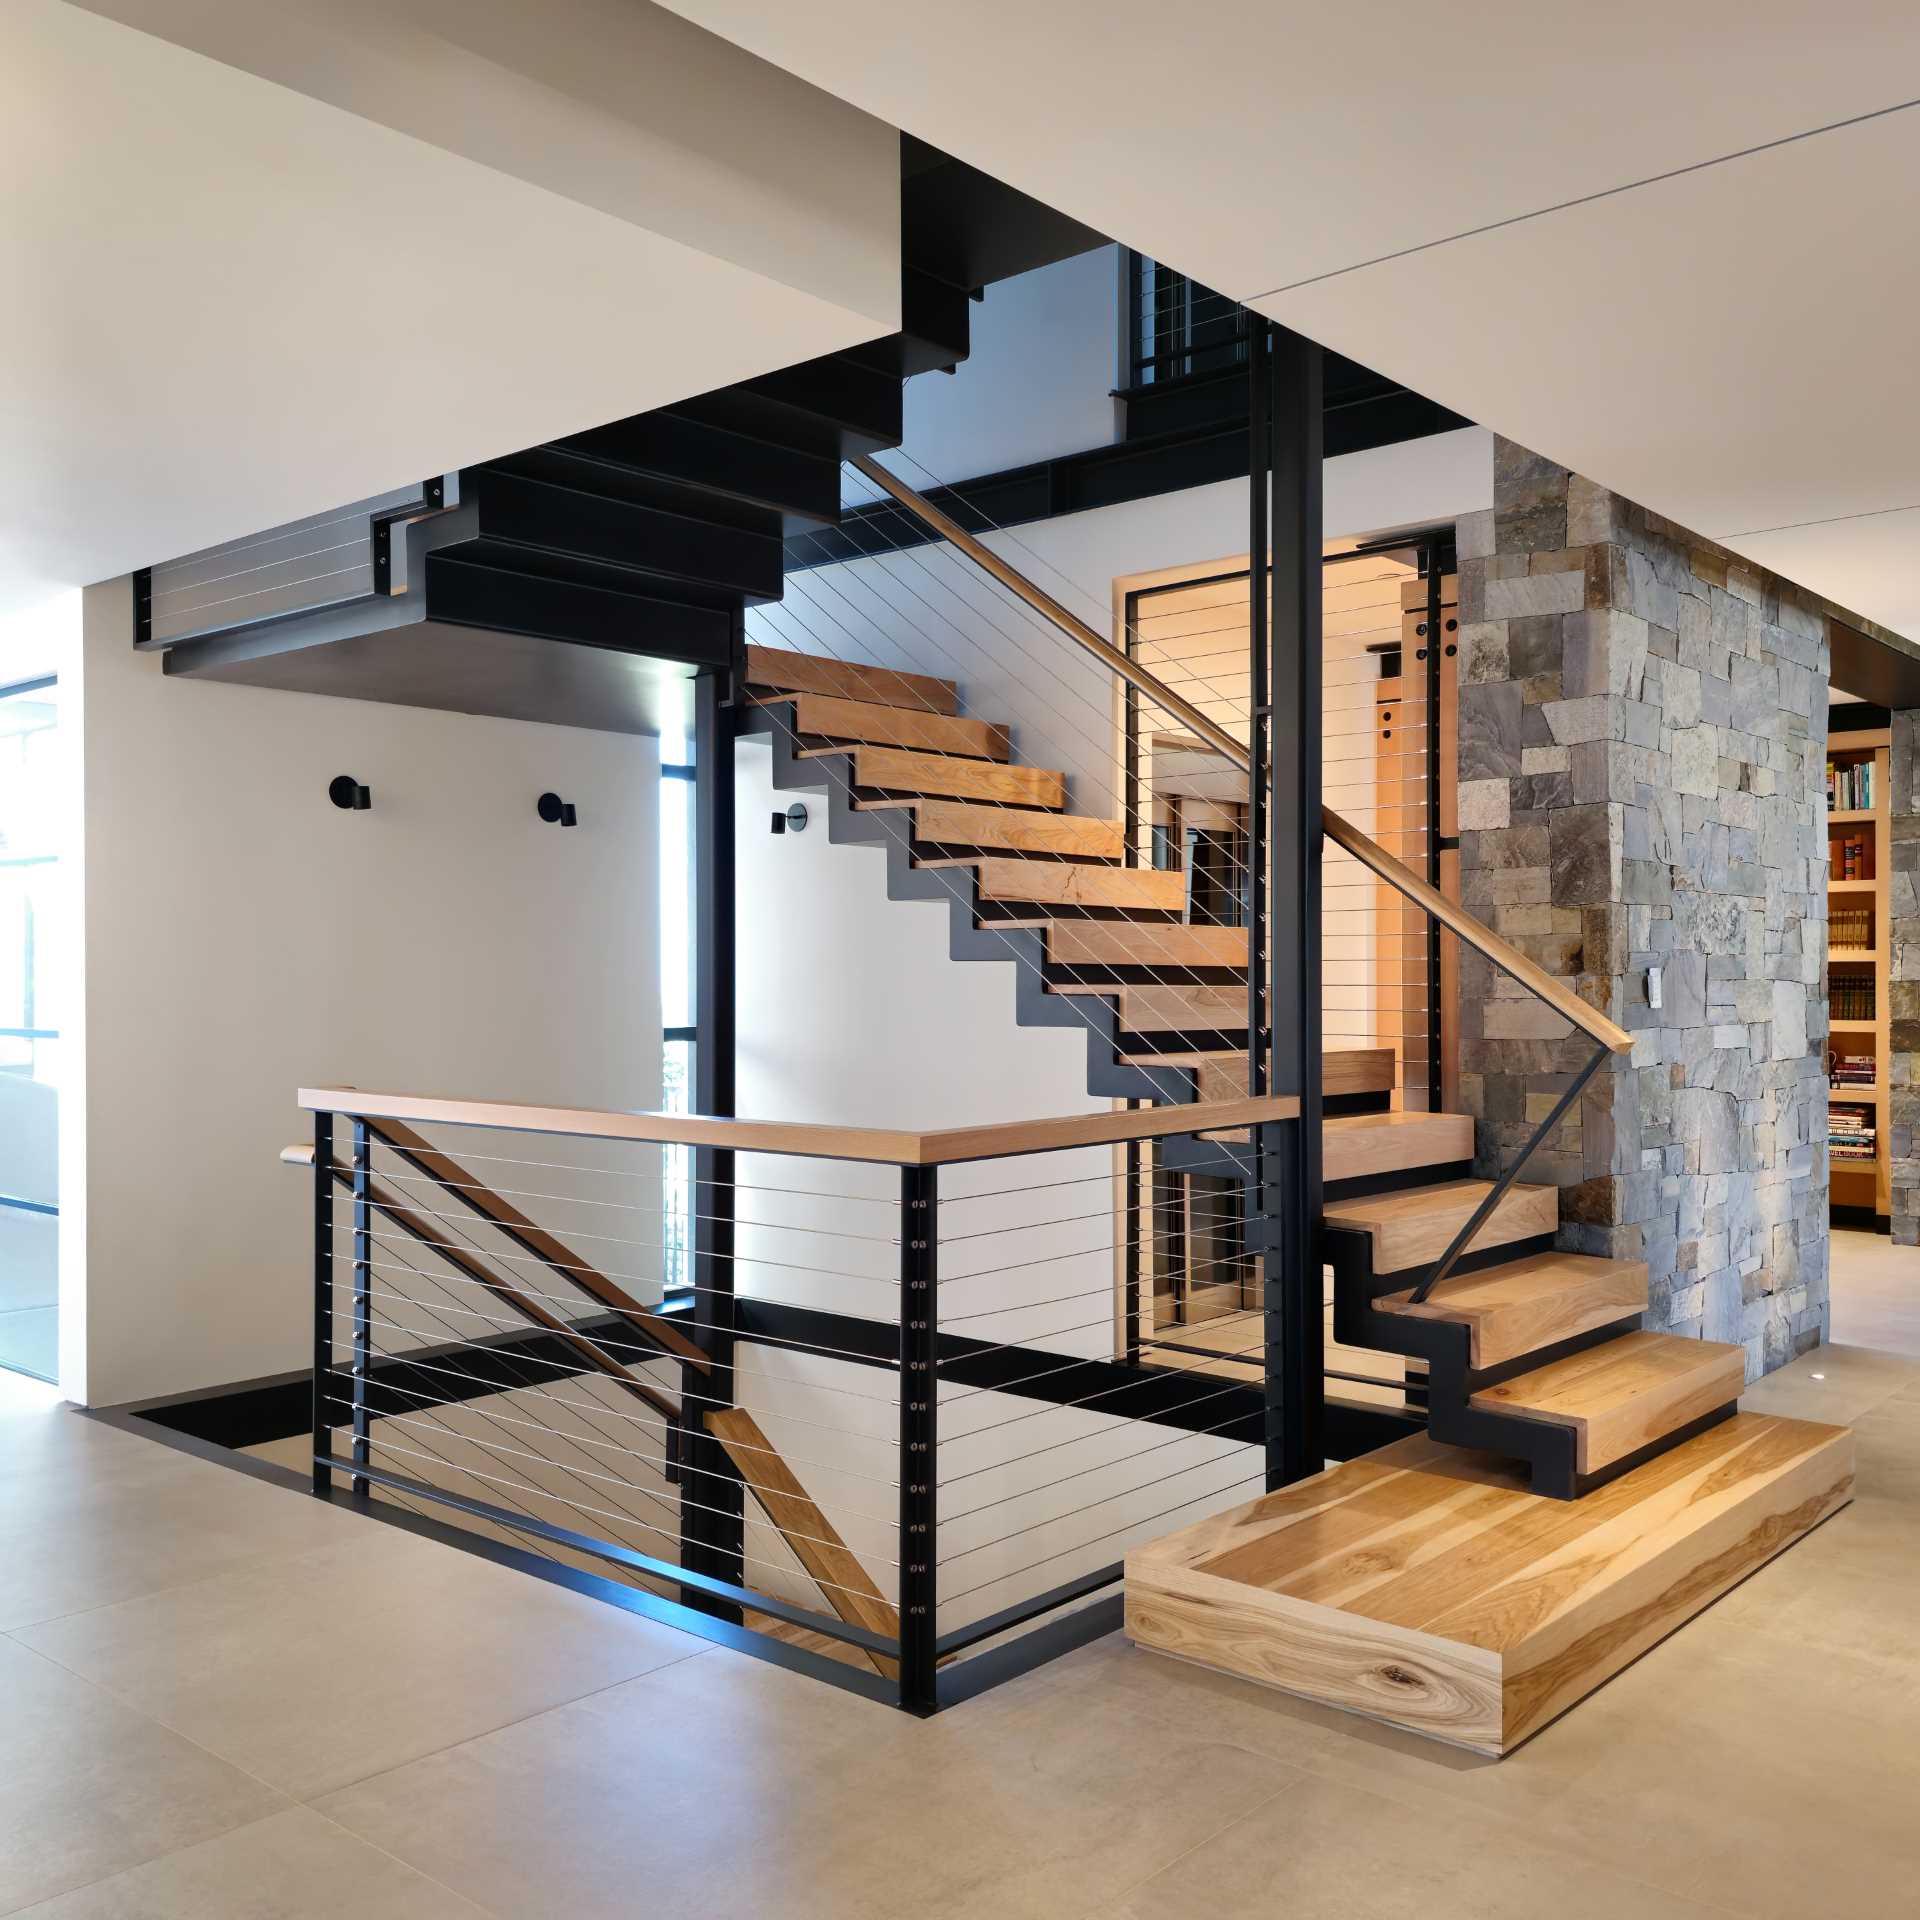 A modern ،me with steel and wood stairs.